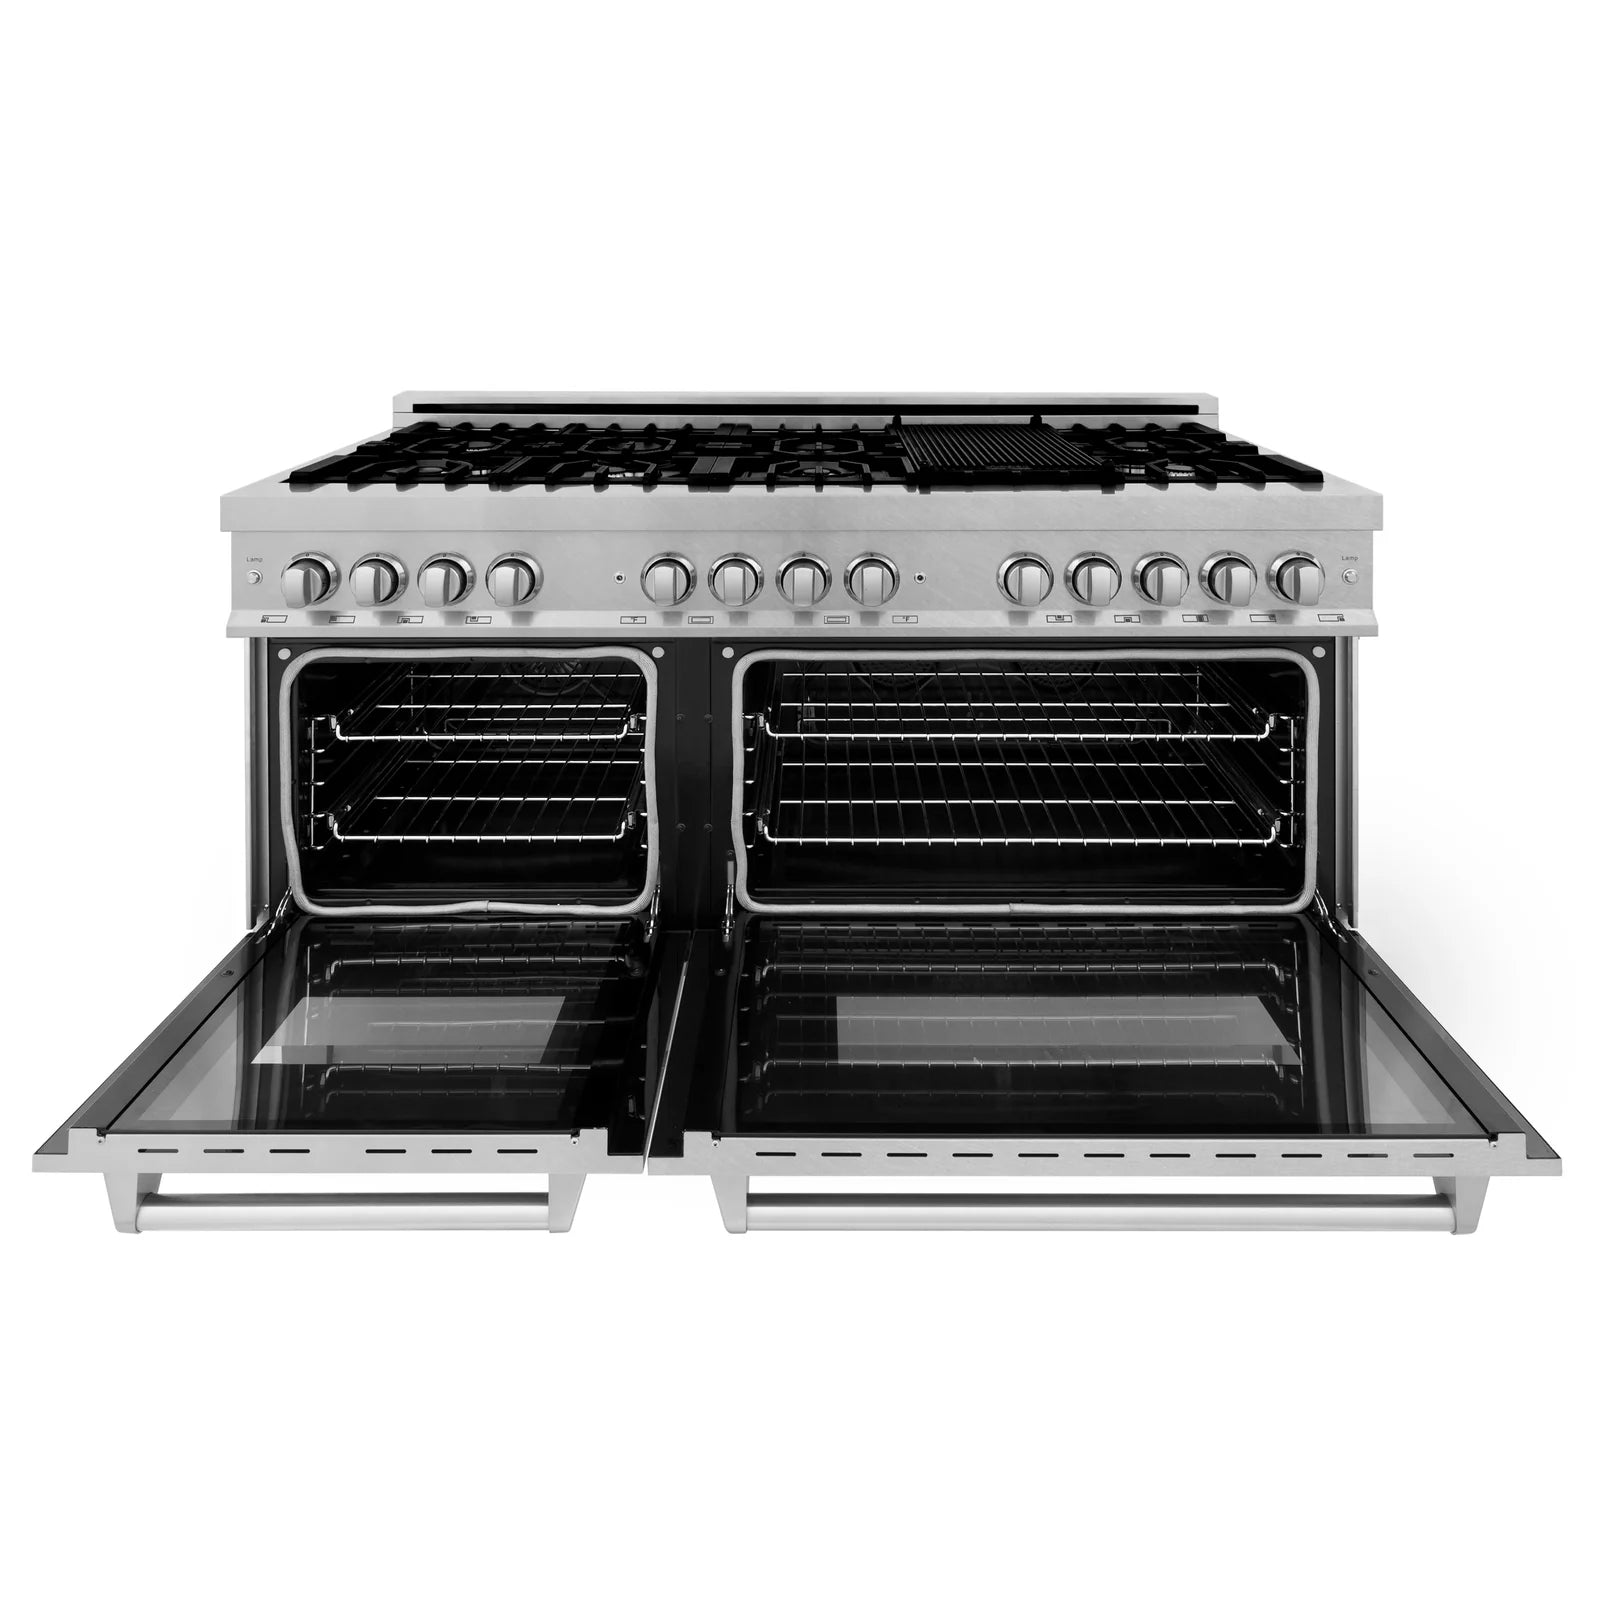 ZLINE 60-Inch Dual Fuel Range with 7.4 cu. ft. Electric Oven and Gas Cooktop and Griddle in DuraSnow Fingerprint Resistant Stainless Steel - RAS-SN-GR-60